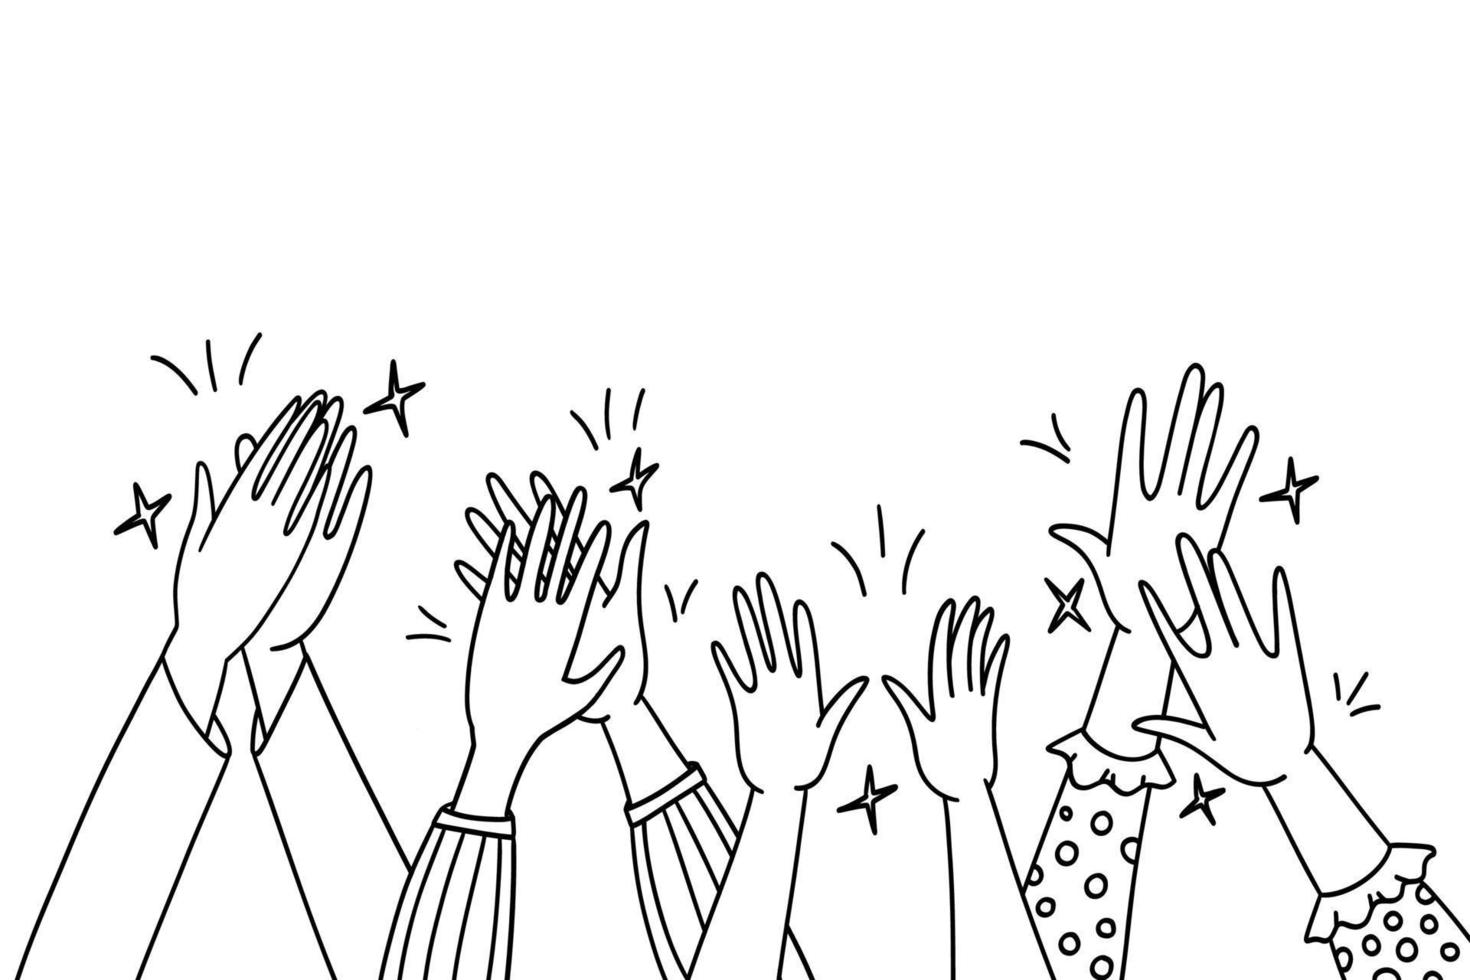 Hand drawn clapping human hands vector doodle set. Collection of men and women raising arms making applause isolated illustration. Greeting celebration or ovation concept